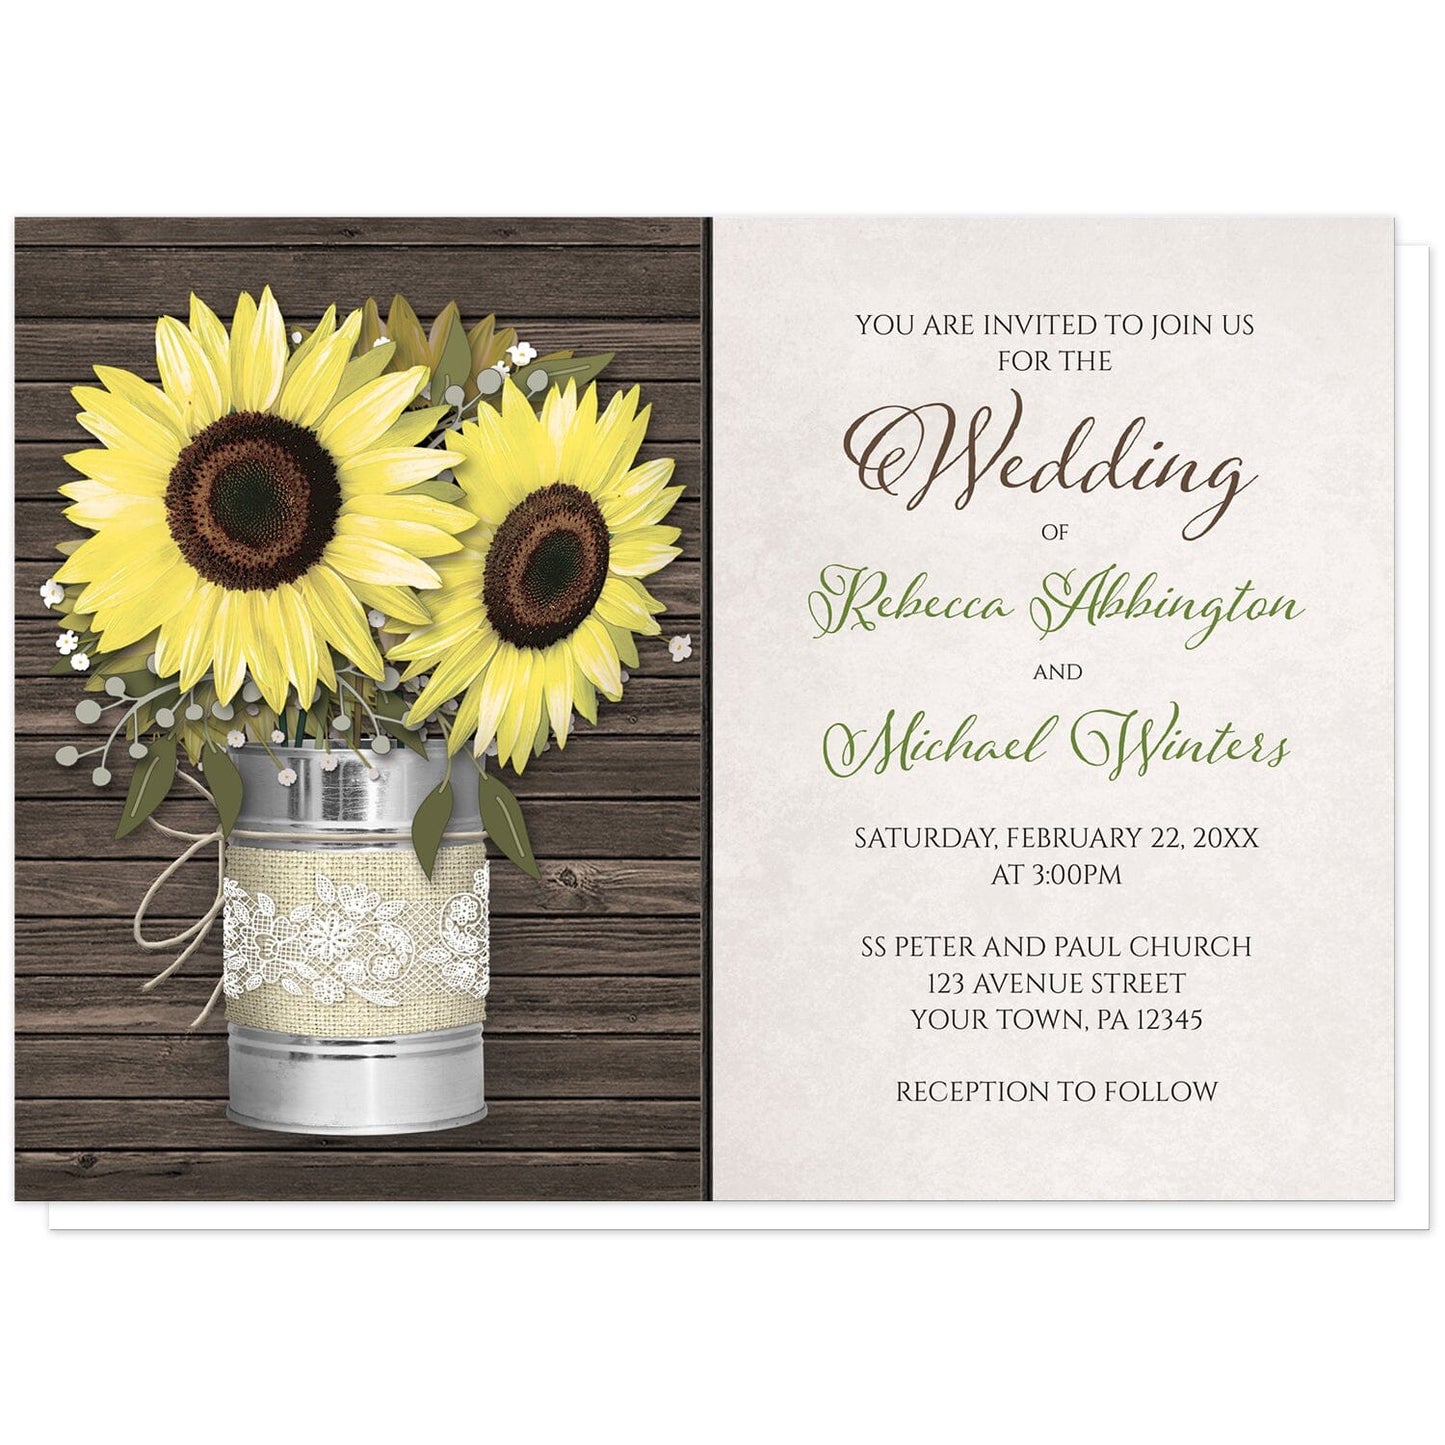 Rustic Burlap and Lace Tin Can Sunflower Wedding Invitations at Artistically Invited. Rustic burlap and lace tin can sunflower wedding invitations with an illustration of big yellow sunflowers inside a rustic metal tin can wrapped in burlap and lace and tied with twine over a dark wood background. Your personalized marriage celebration details are custom printed in green and brown over a beige background to the right of the tin can sunflowers.